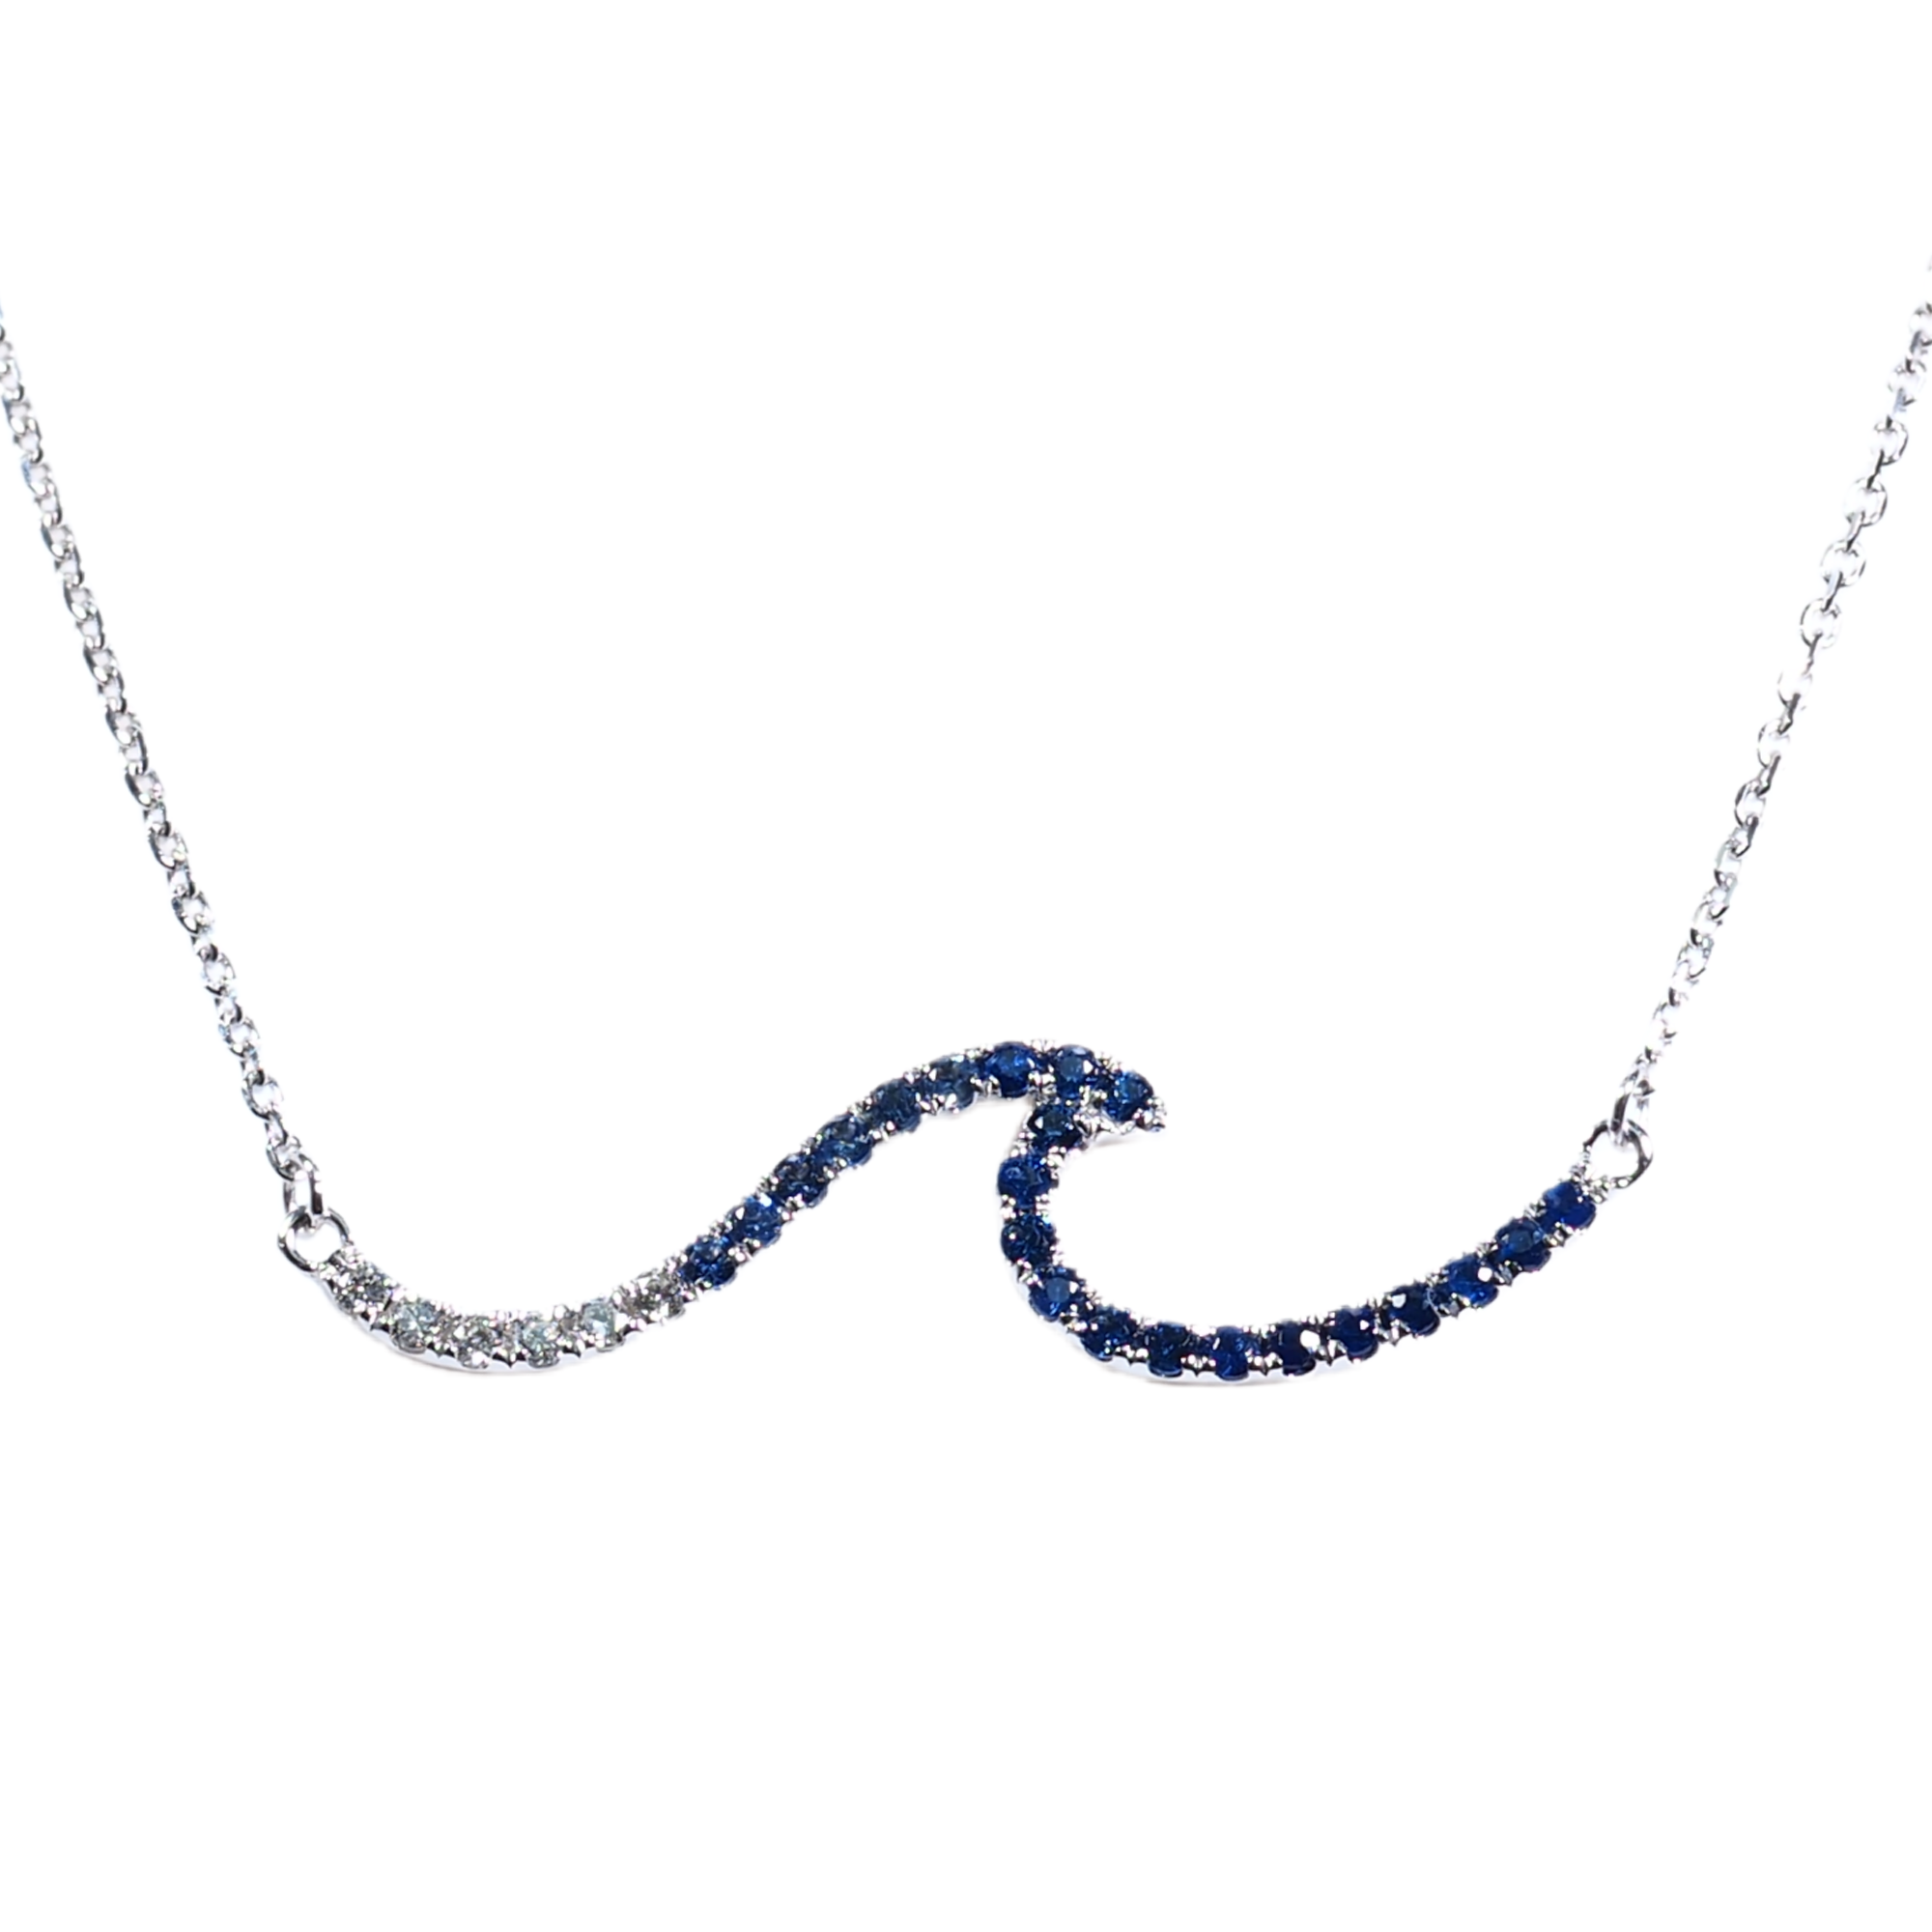 Ocean Wave Necklace with .33 ctw Sapphire & Diamond Accents